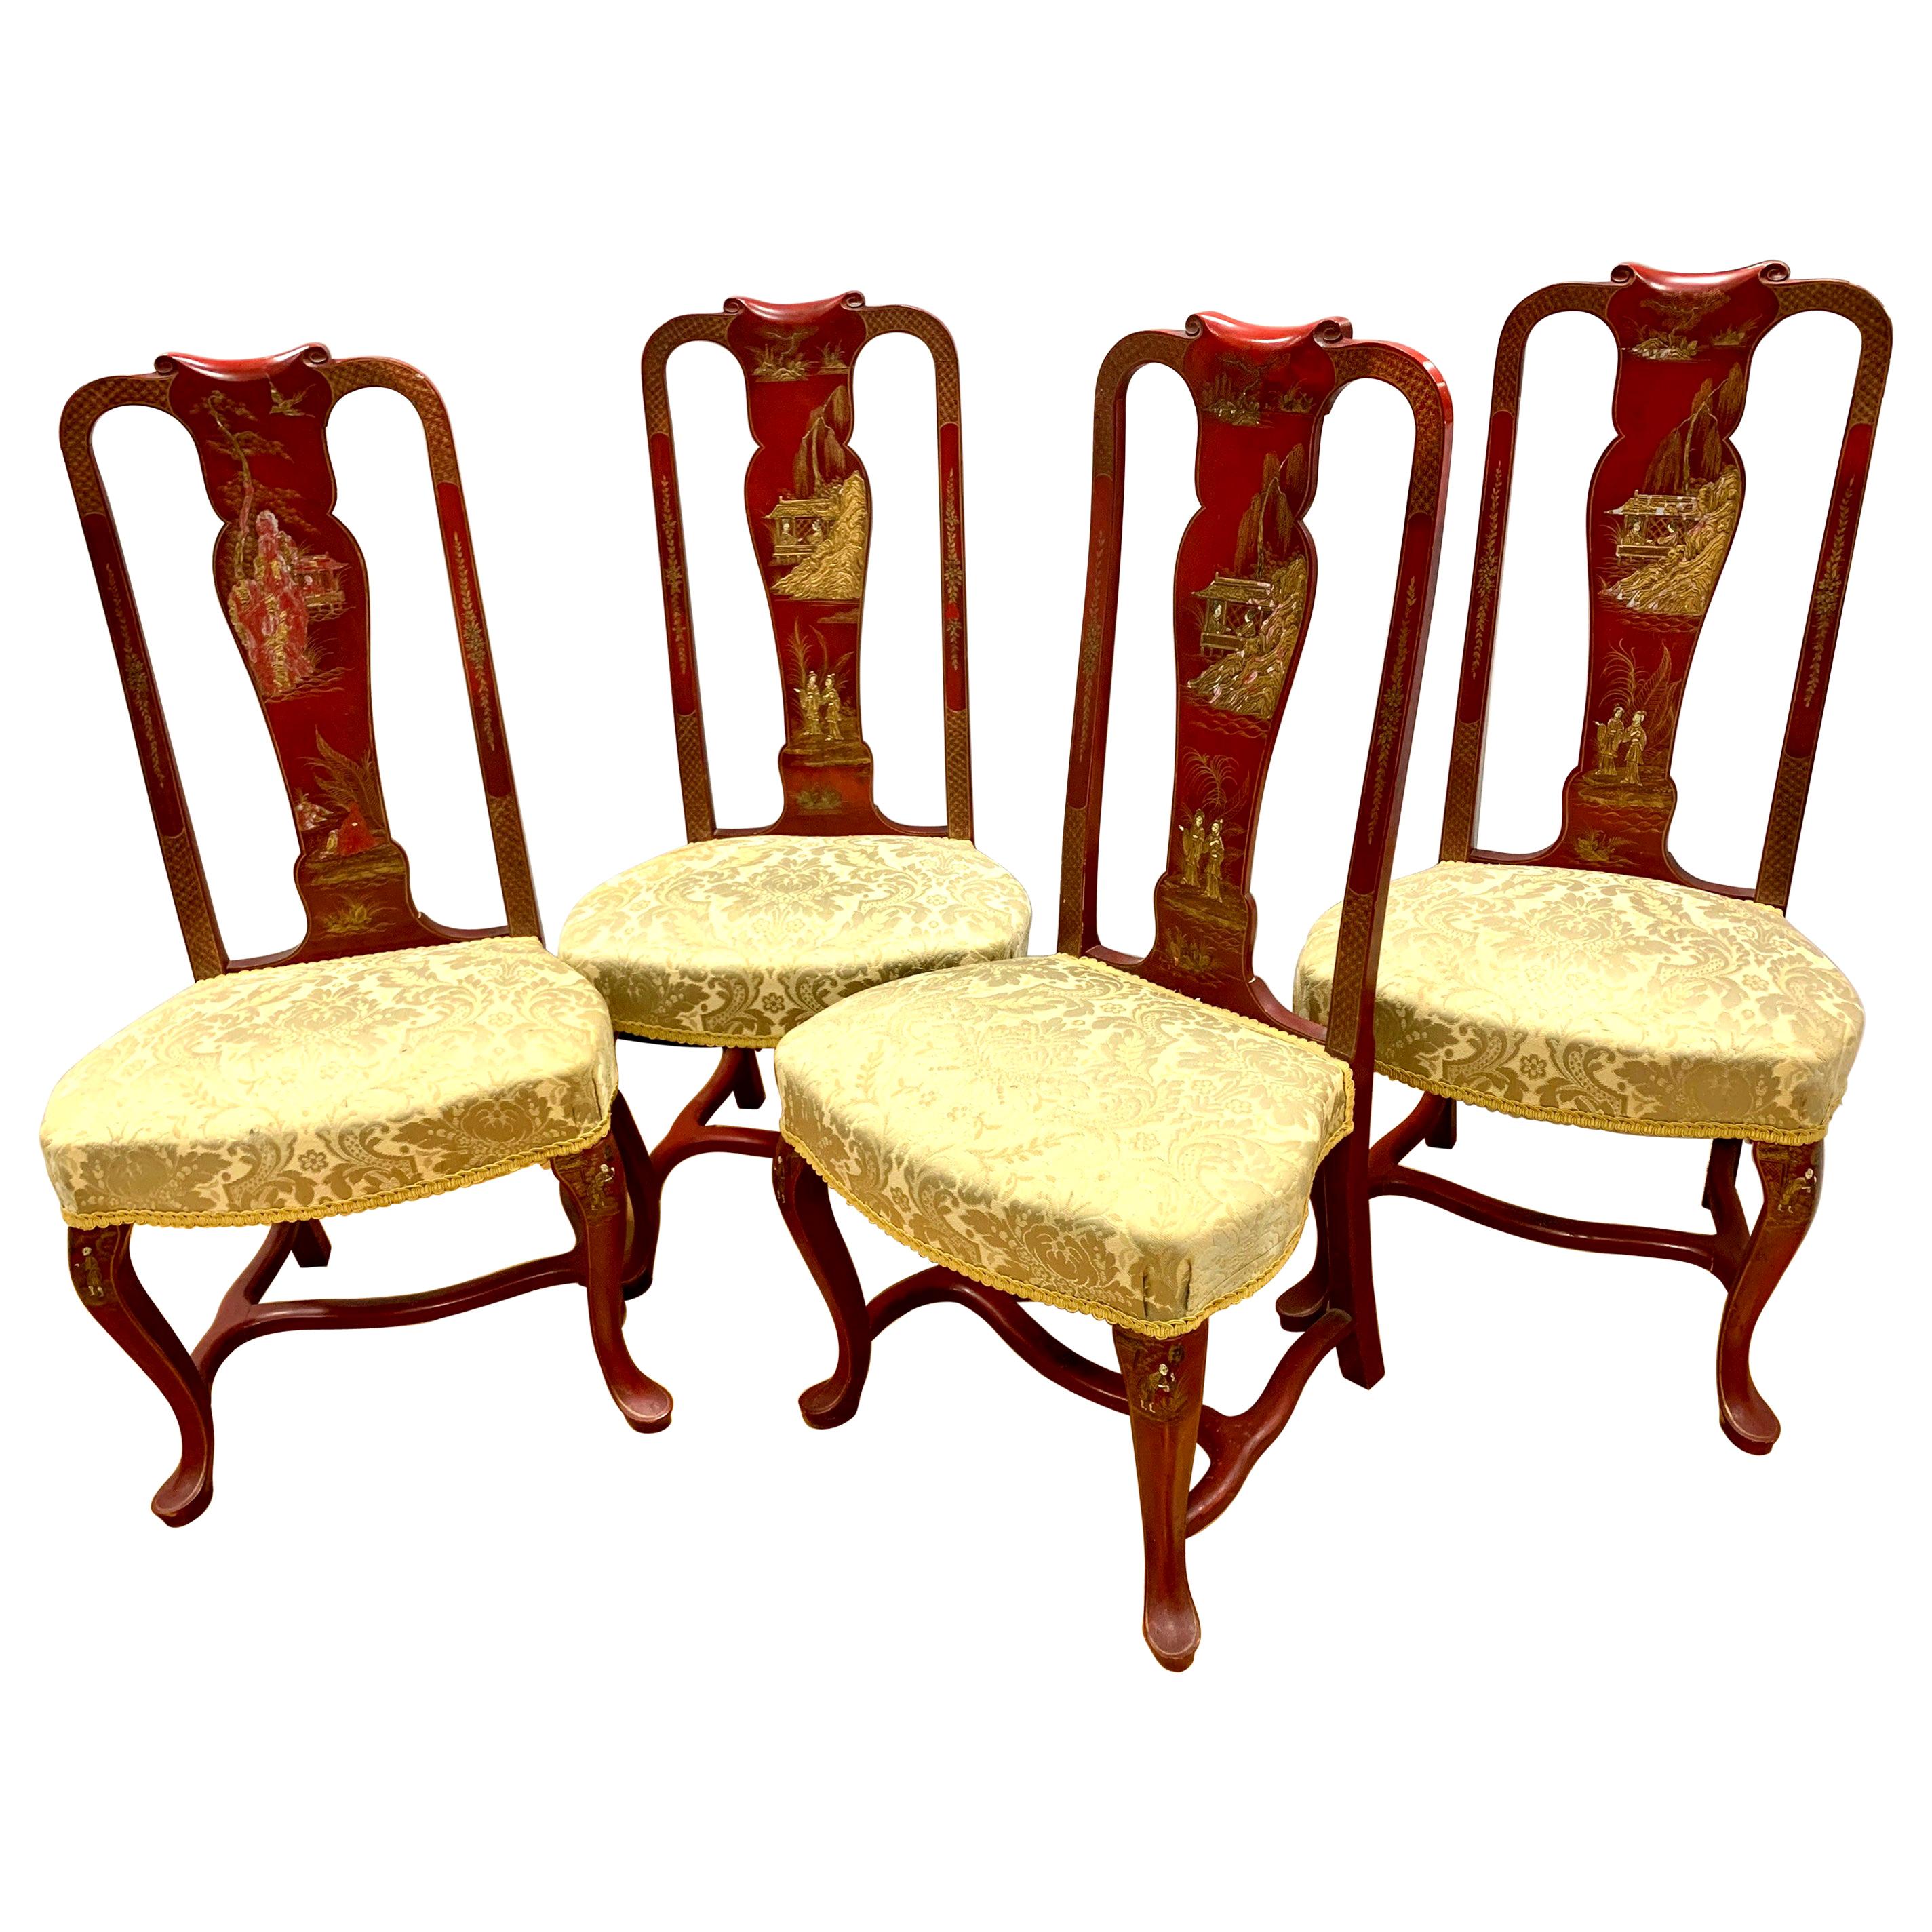 Mid-Century Chinoiserie Red Lacquered and Gilt Dining Chairs, Set of 4